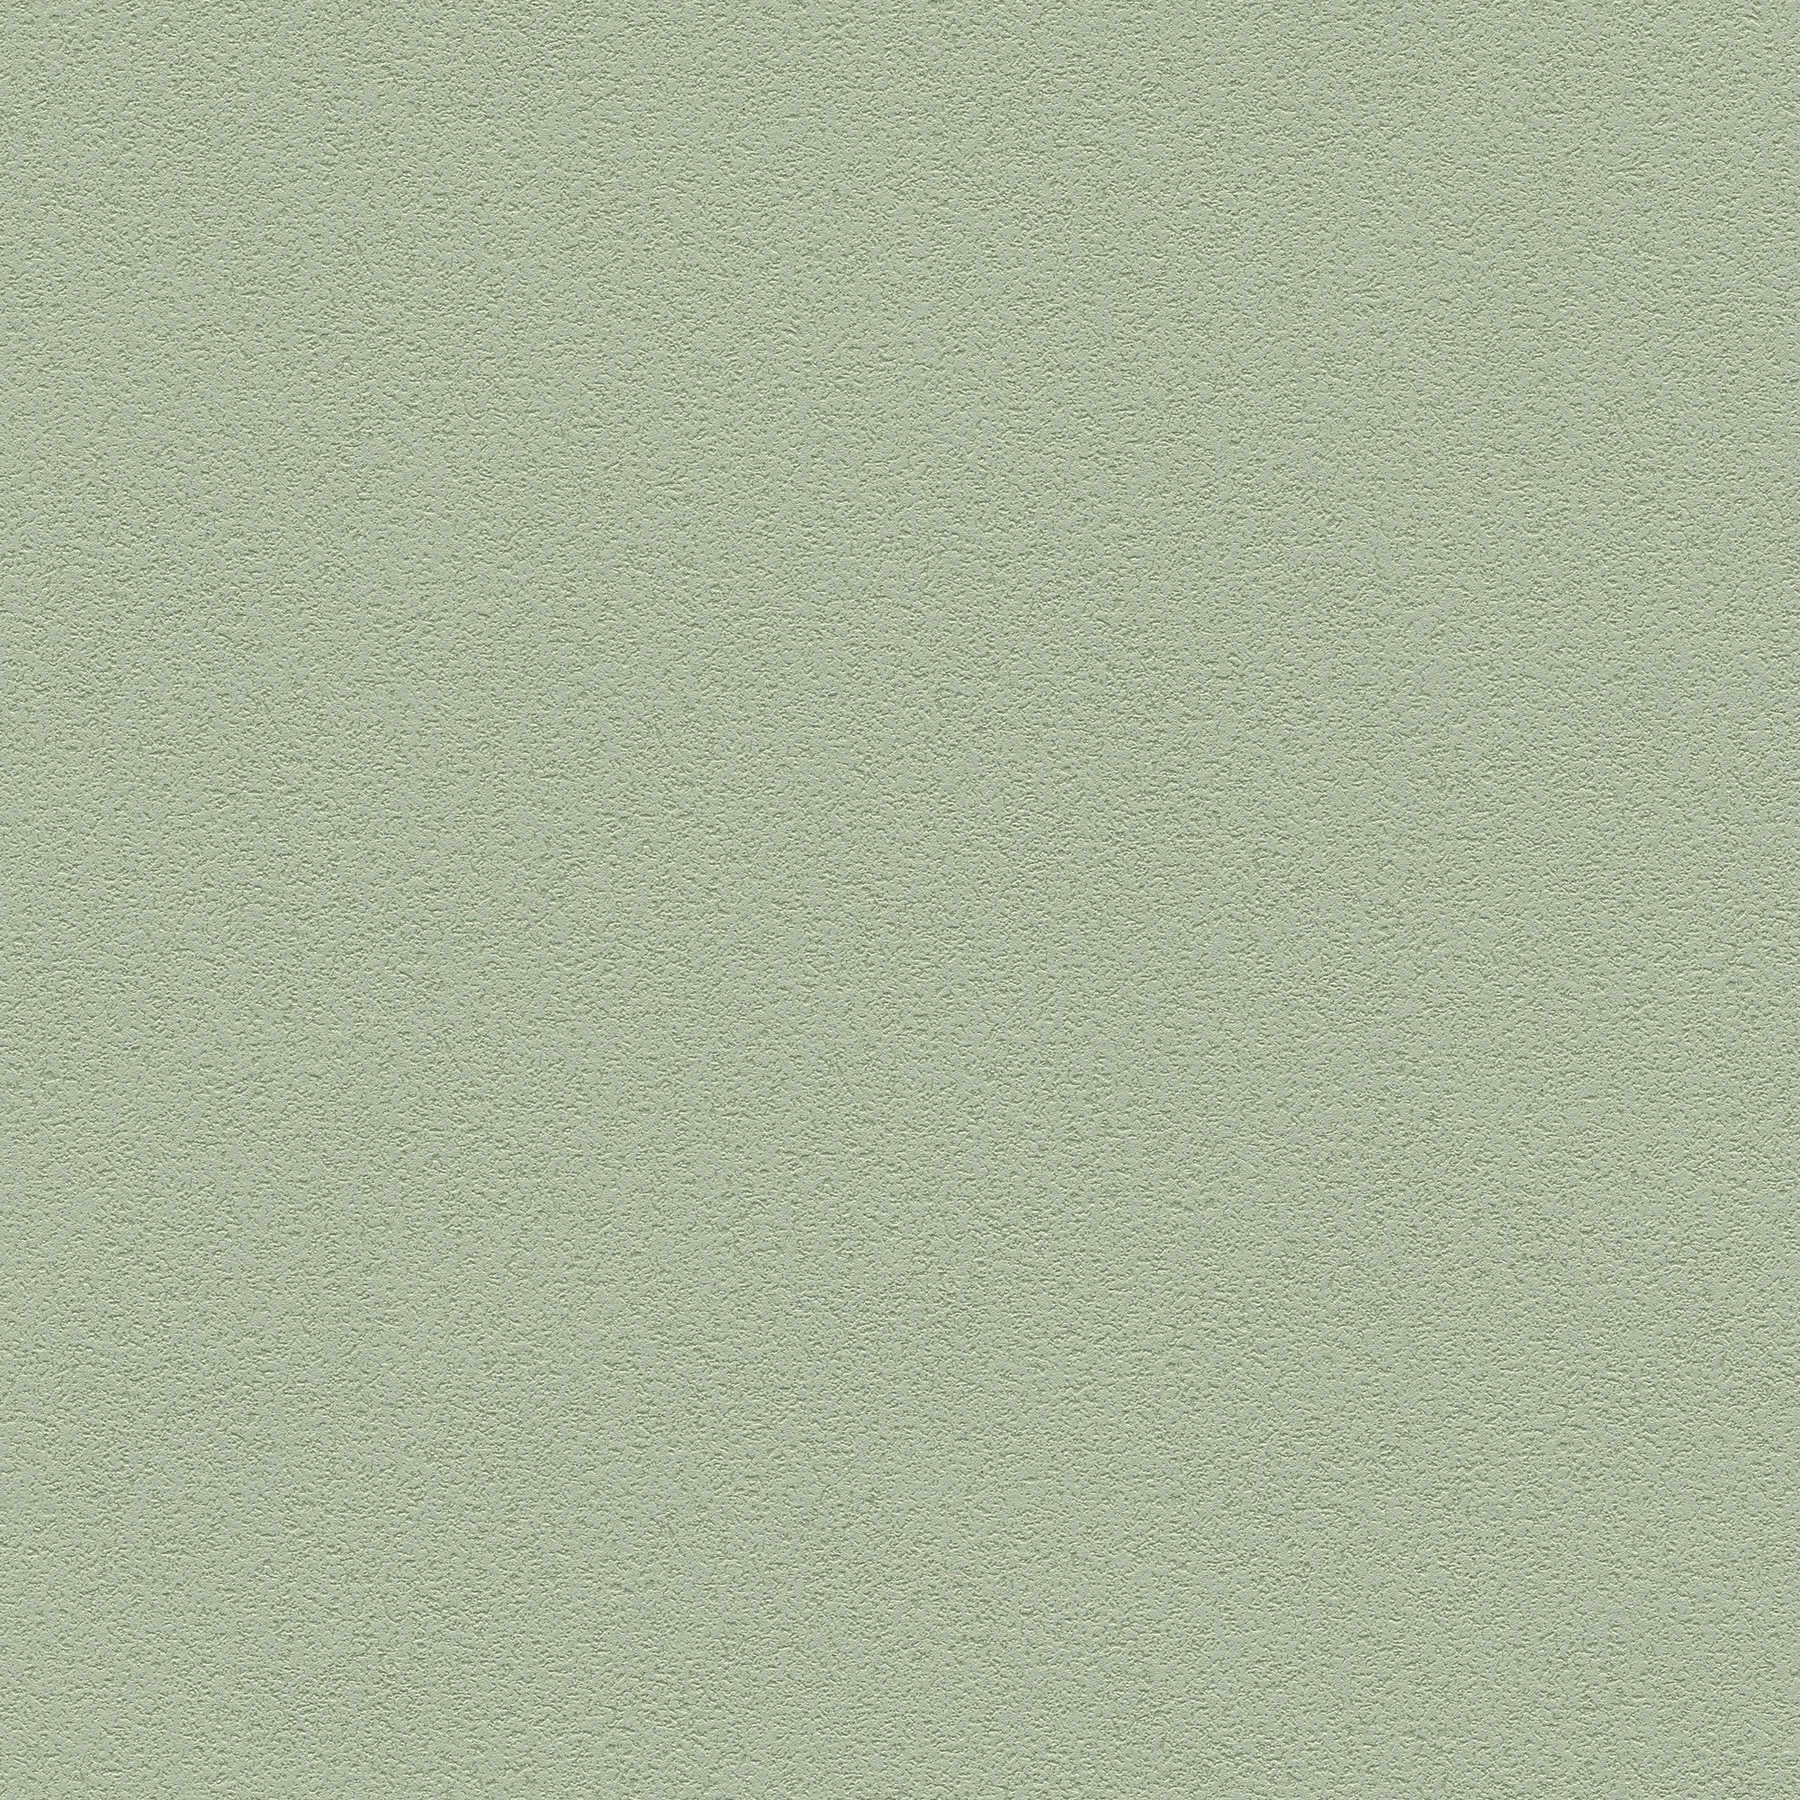 Plain wallpaper with fine surface texture - green
